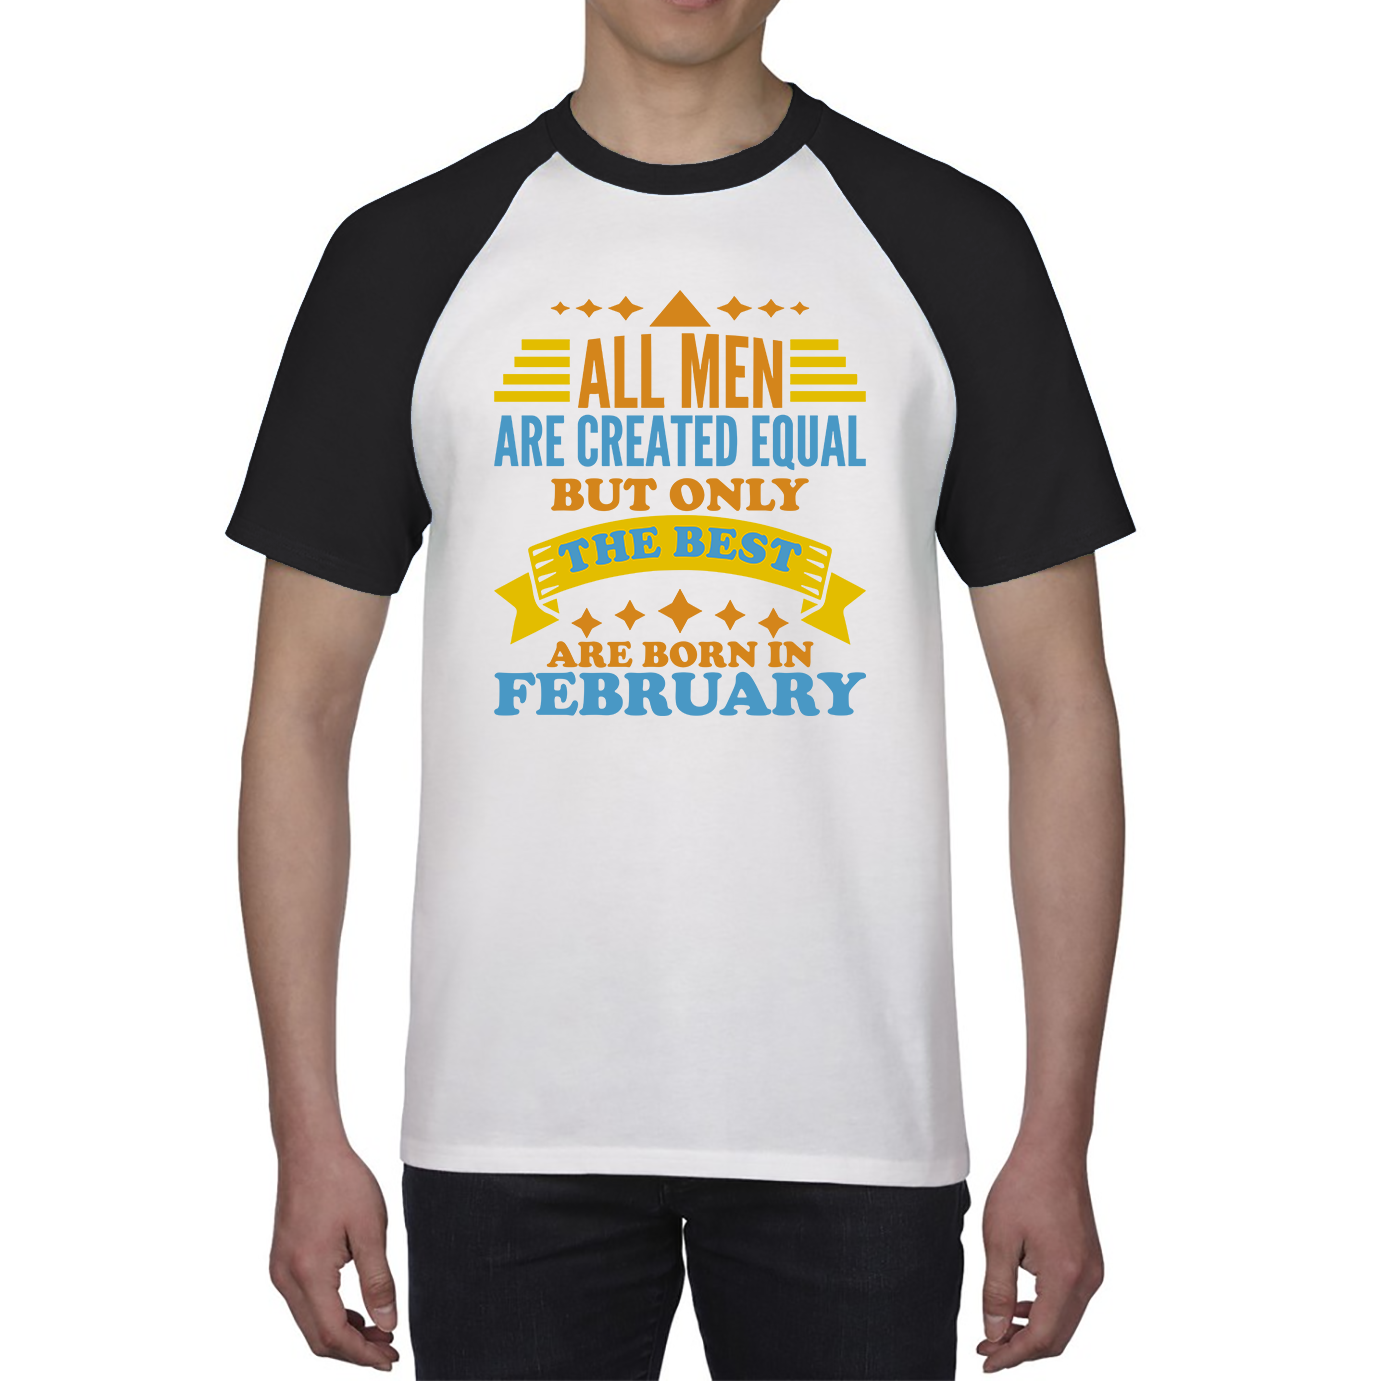 All Men Are Created Equal But Only The Best Are Born In Februray Funny Birthday Quote Baseball T Shirt